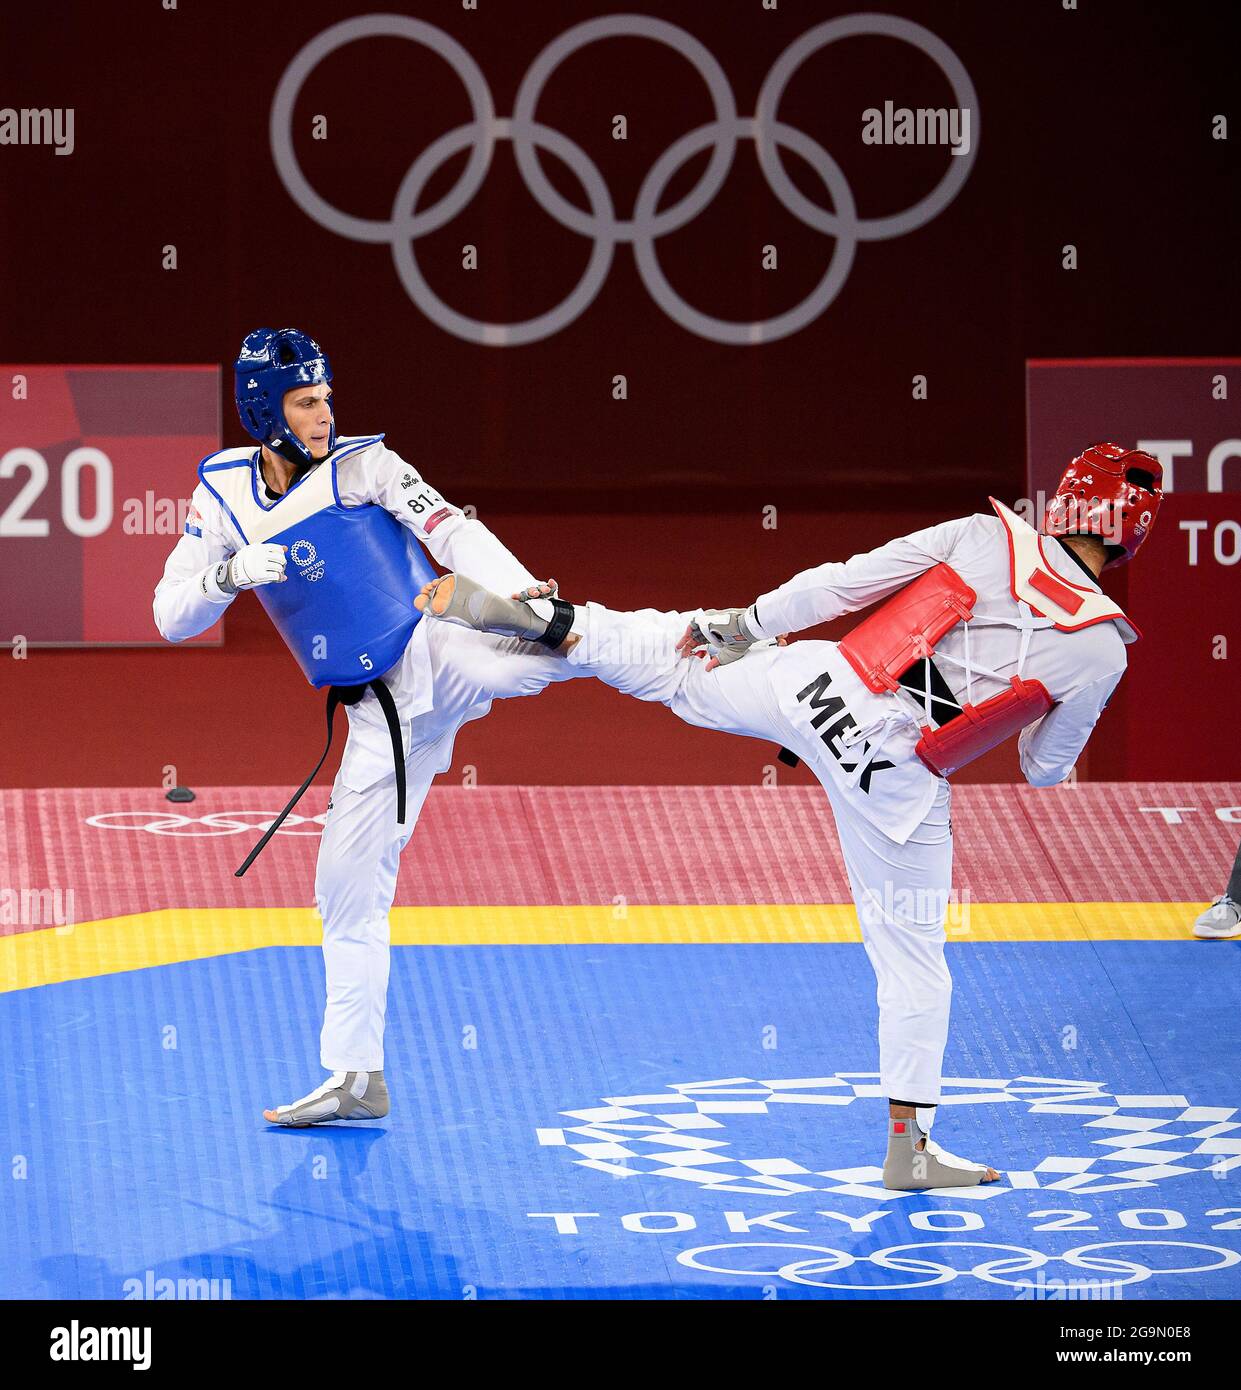 Ivan SAPINA (blue), left, (CRO) vs. Carlos SANSORES (red), action, Ivan SAPINA (blue) (CRO) vs. Carlos SANSORES (red) (MEX) 4: 6, Taekwondo men   80Kg, 1/8 Final, Men   80kg Round of 16, on July 27th, 2021 Summer Olympics 2020, from July 23rd. - 08.08.2021 in Tokyo/Japan. Stock Photo